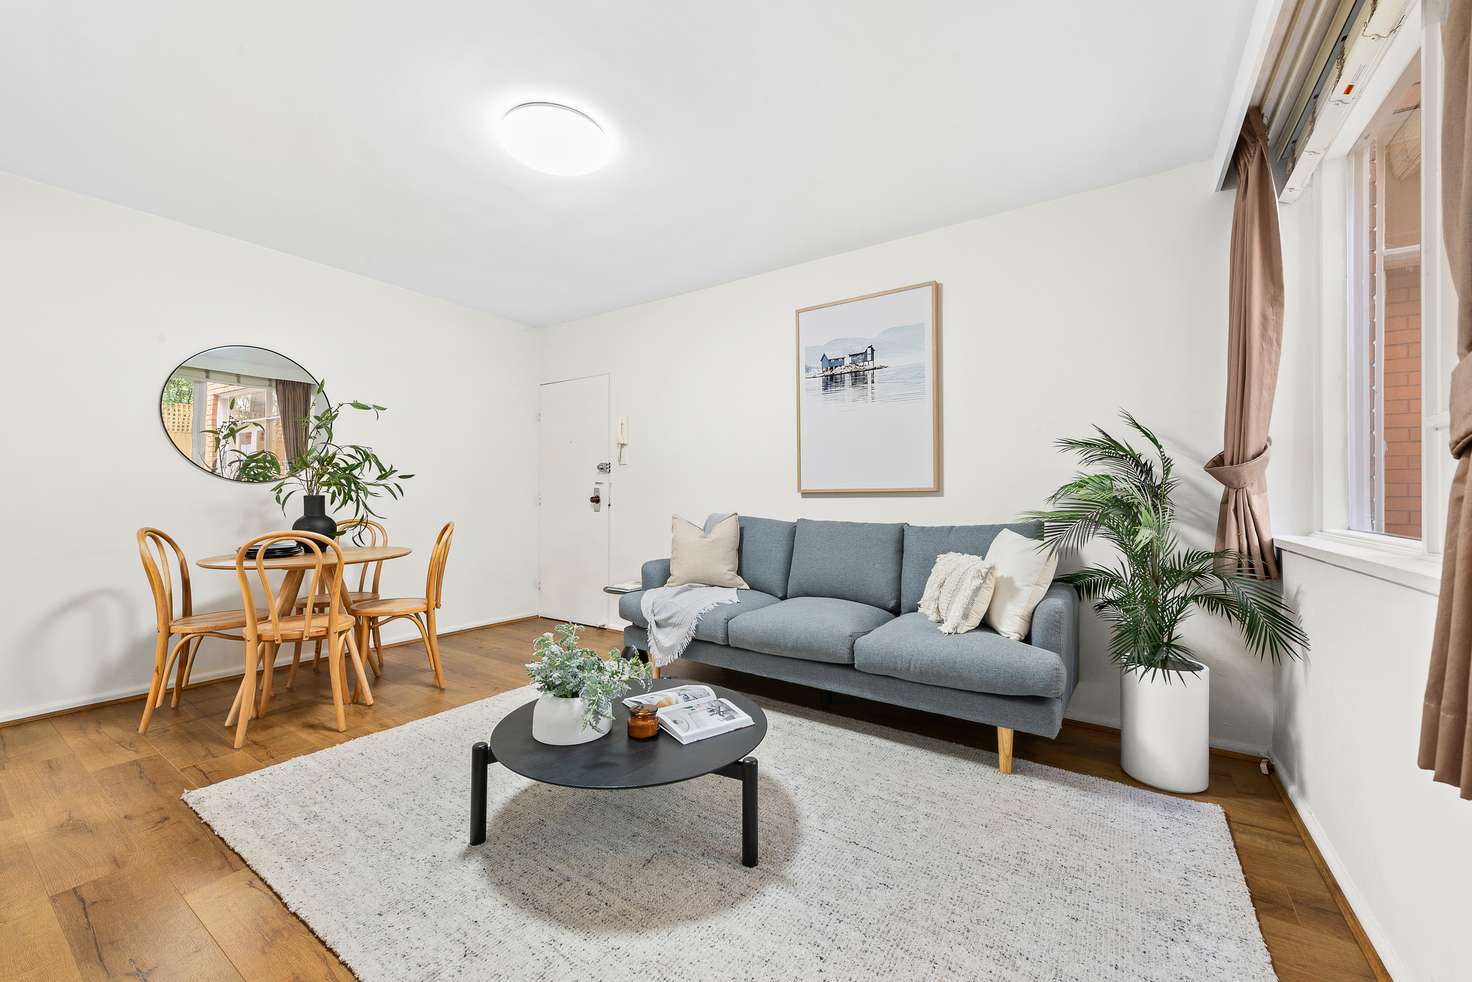 Main view of Homely apartment listing, 4/74 Denbigh Road, Armadale VIC 3143